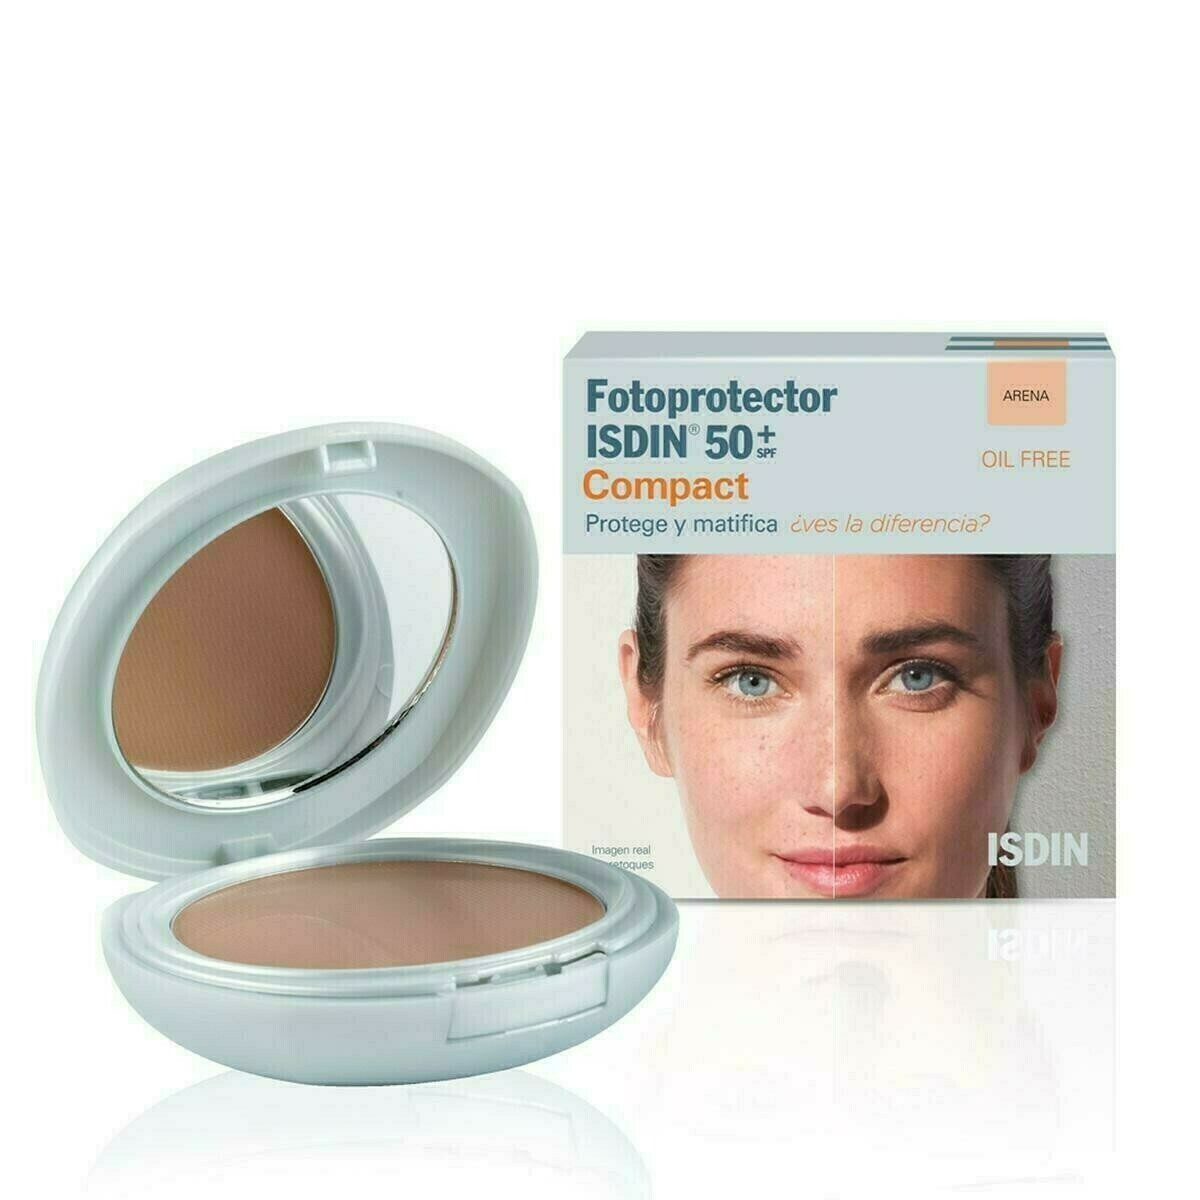 FOTOPROTECTOR ISDIN COMPACT SPF-50 MAQUILLAJE C ARENA 10 G